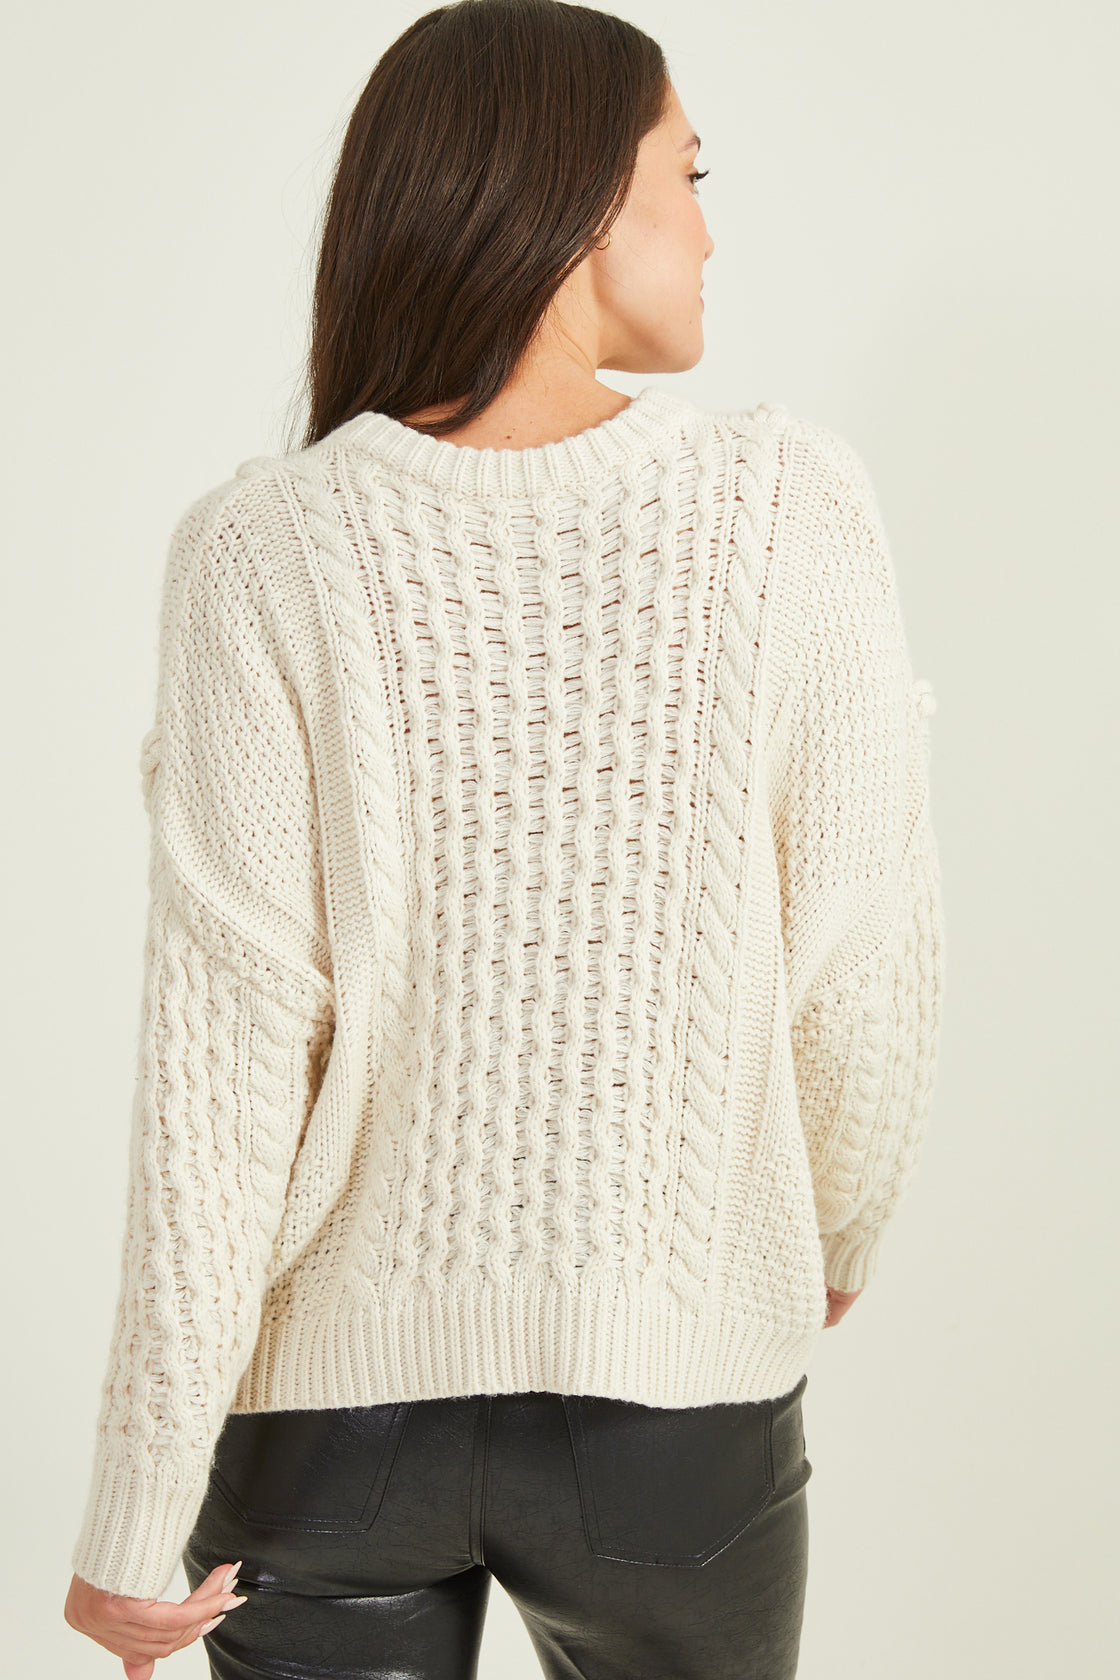 Quinn Cable Knit Sweater final sale